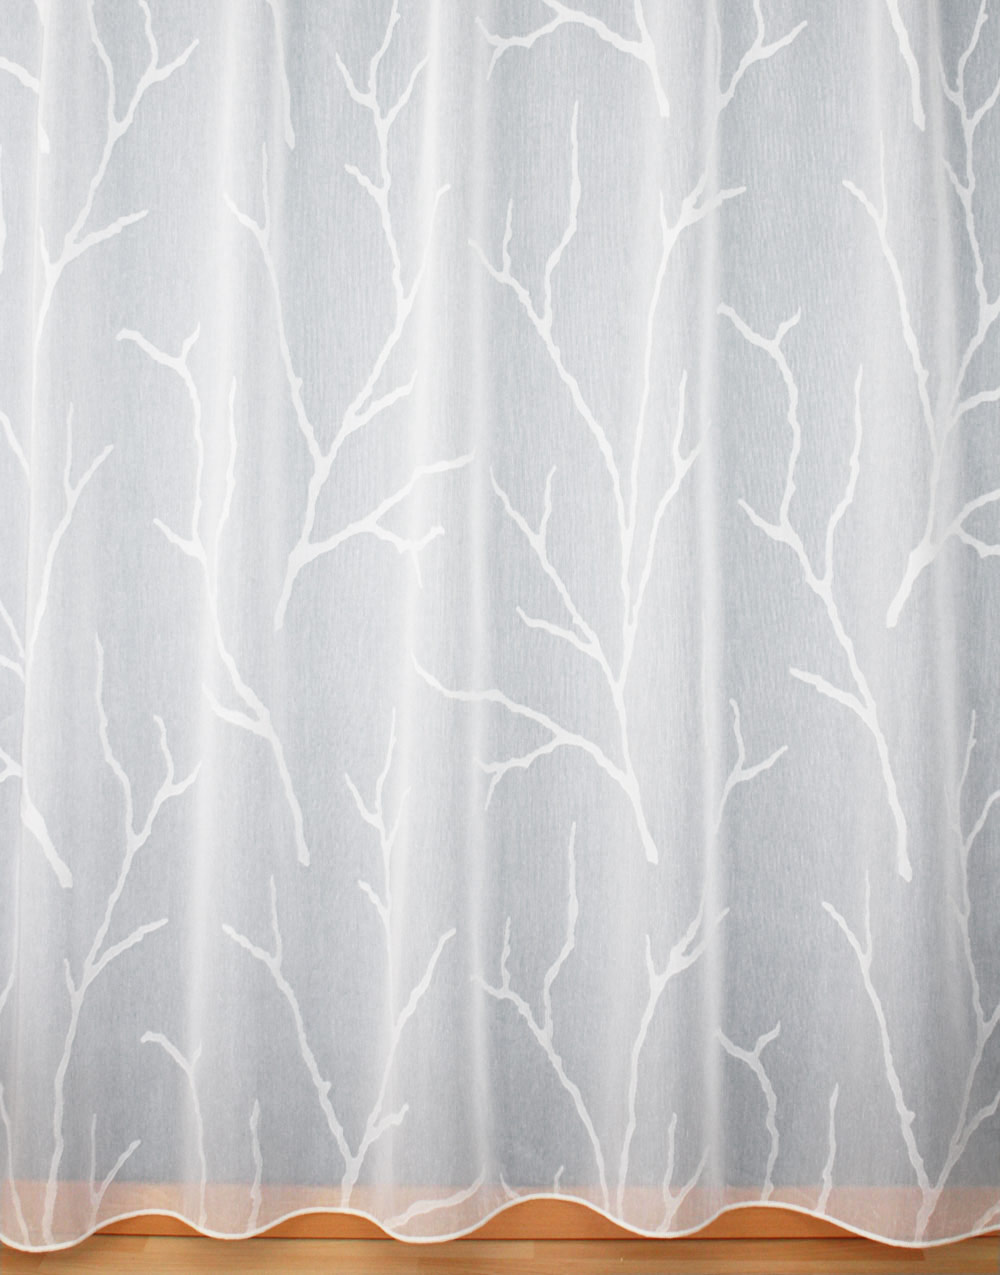 White Sheer curtain with branches